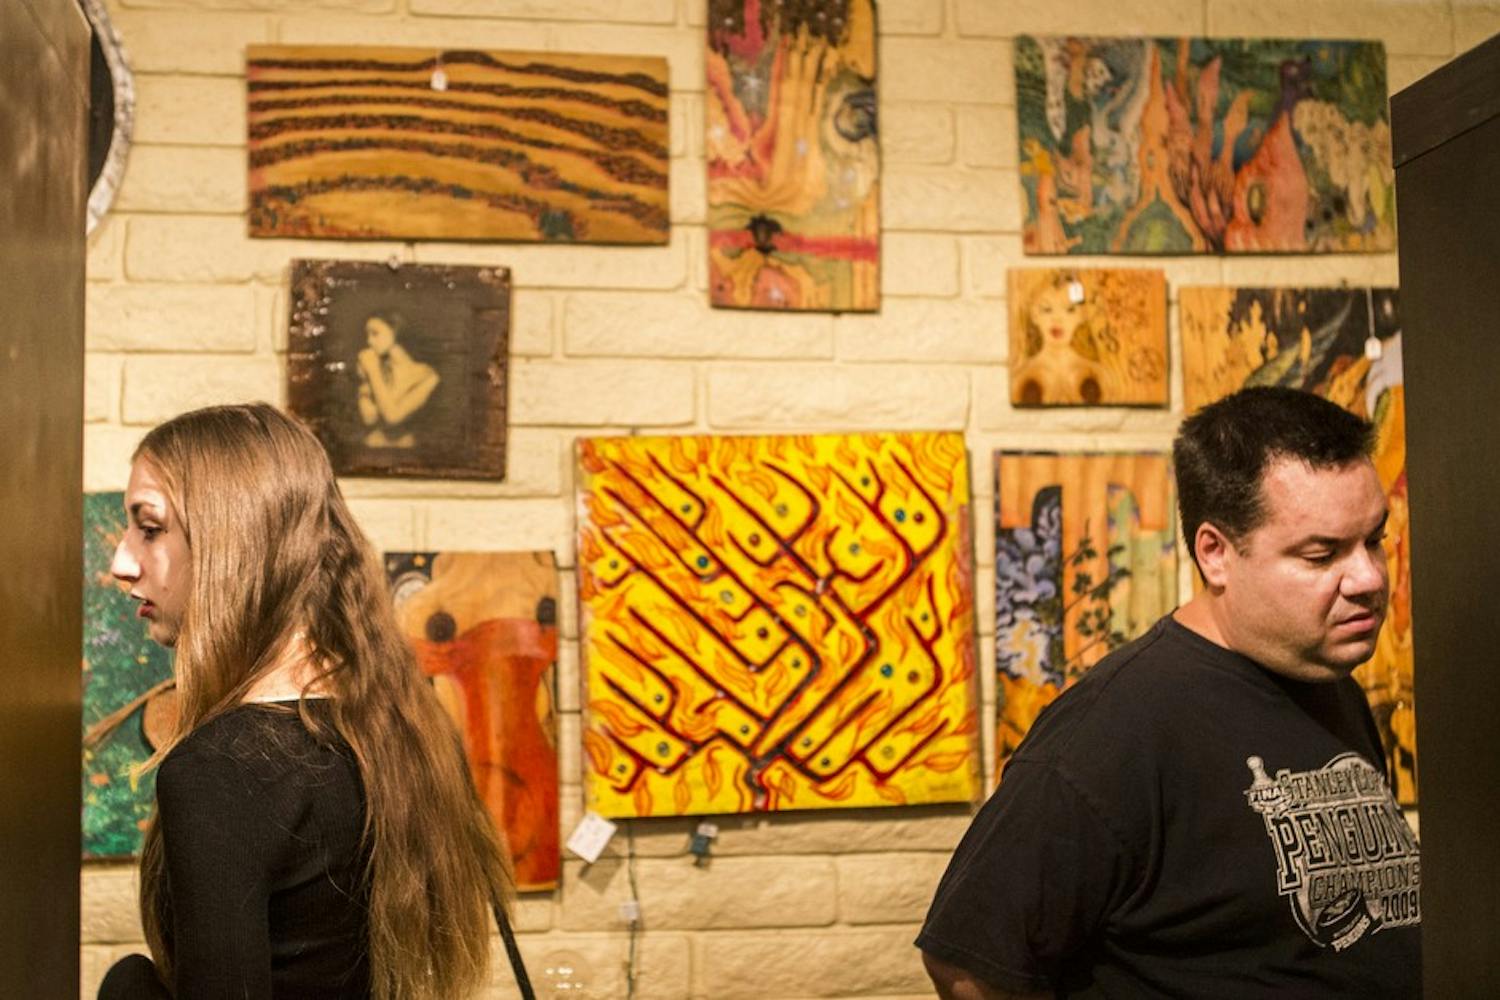 Visitors look around the My Little Phobia Art Show at the Firehouse Art Gallery in downtown Phoenix on Friday, Oct. 9, 2015. 